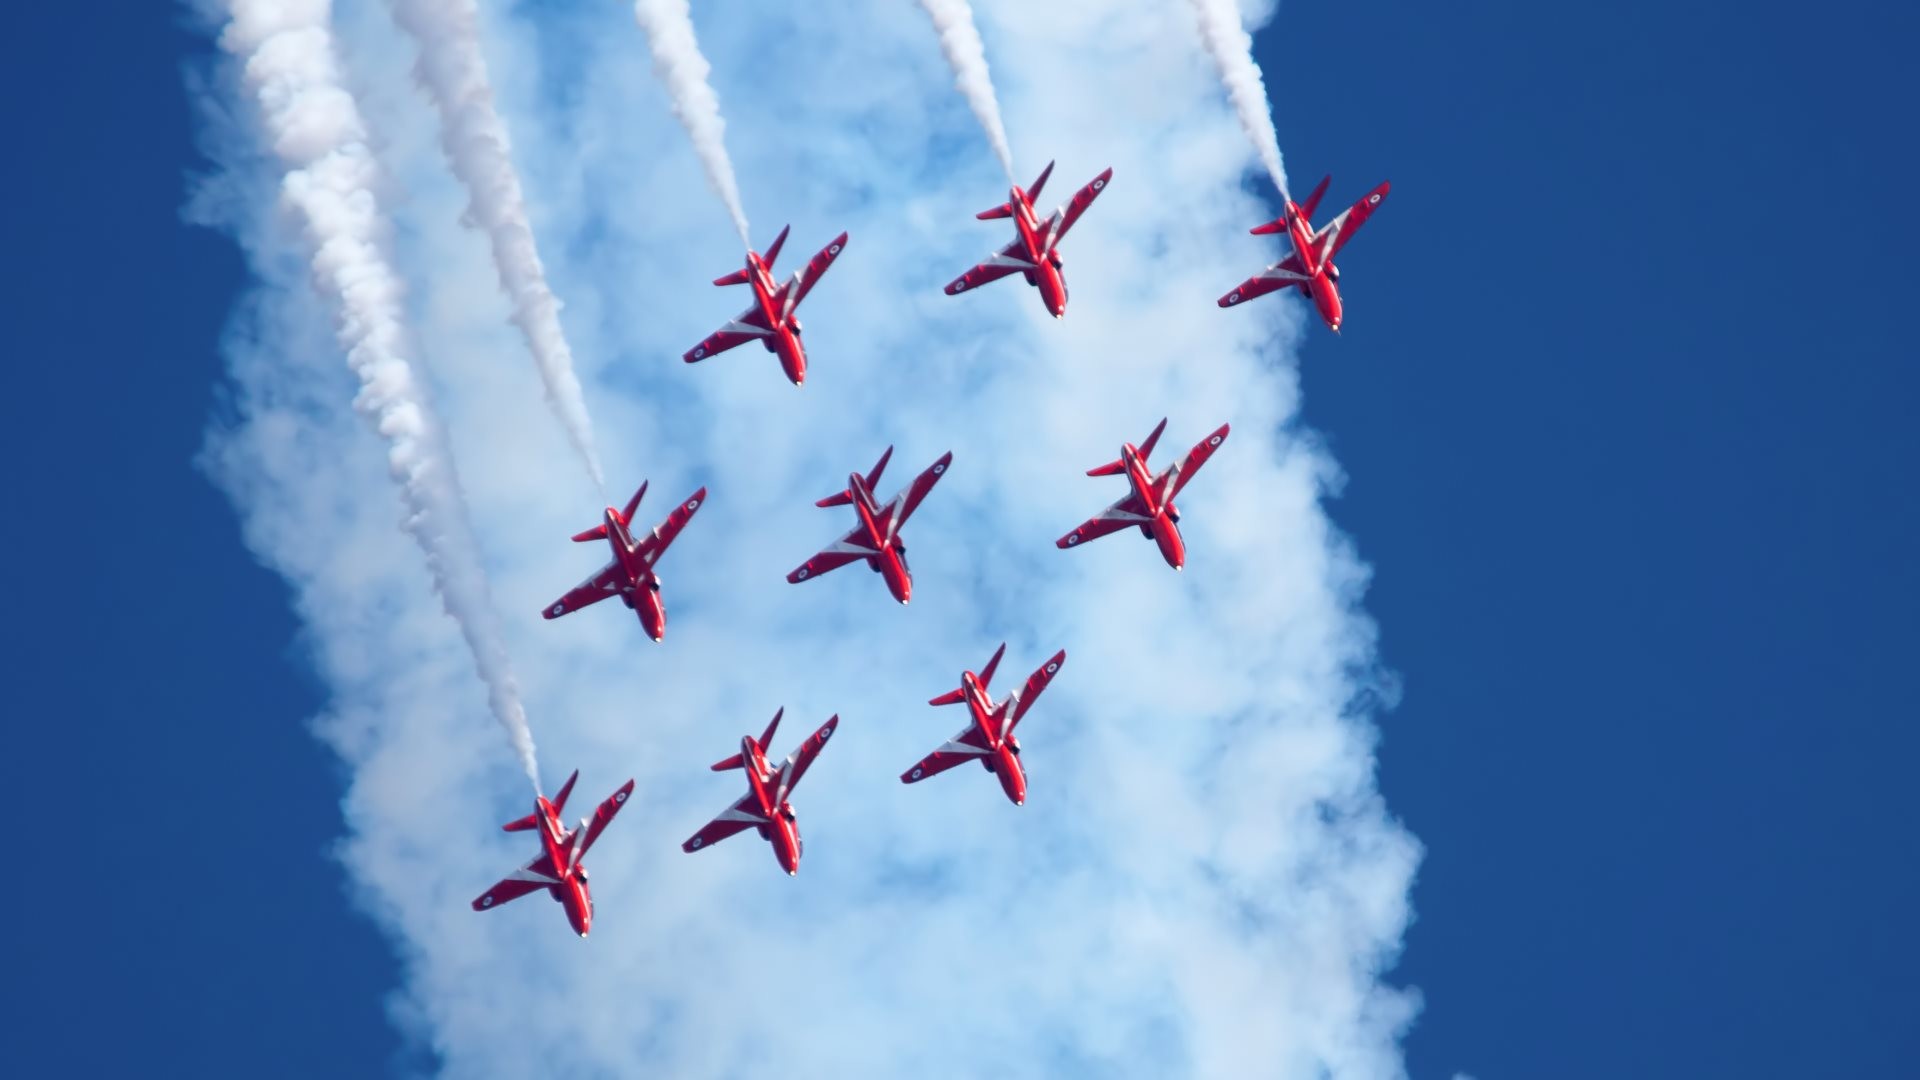 1920x1080 The 2nd wallpaper with Red Arrows Royal AirForce optimized to be set in  phones, tablets and desktop backgrounds